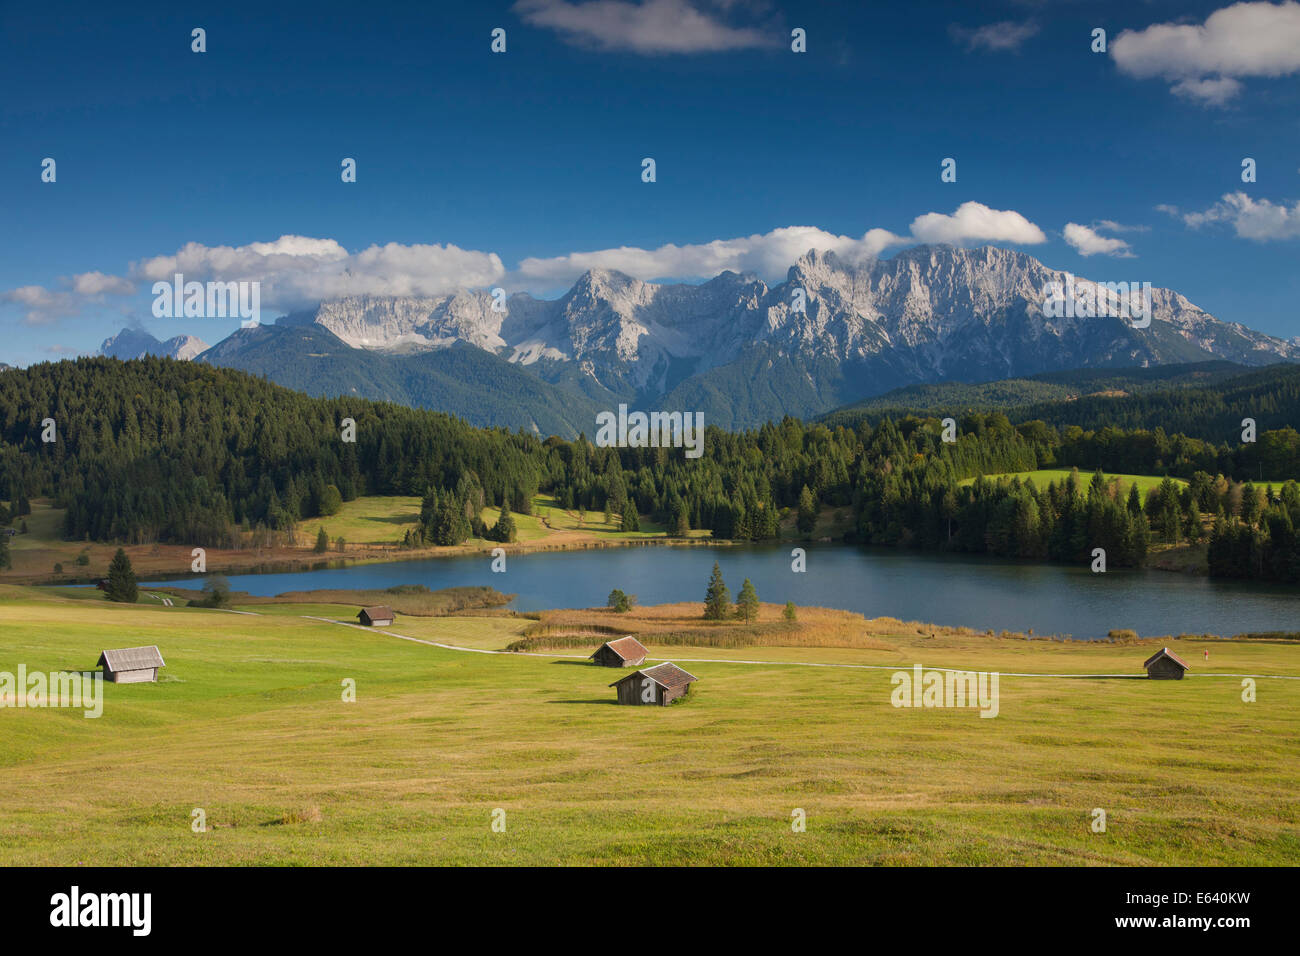 Lake Geroldsee in front of the Karwendel Mountains, Bavaria, Germany Stock Photo